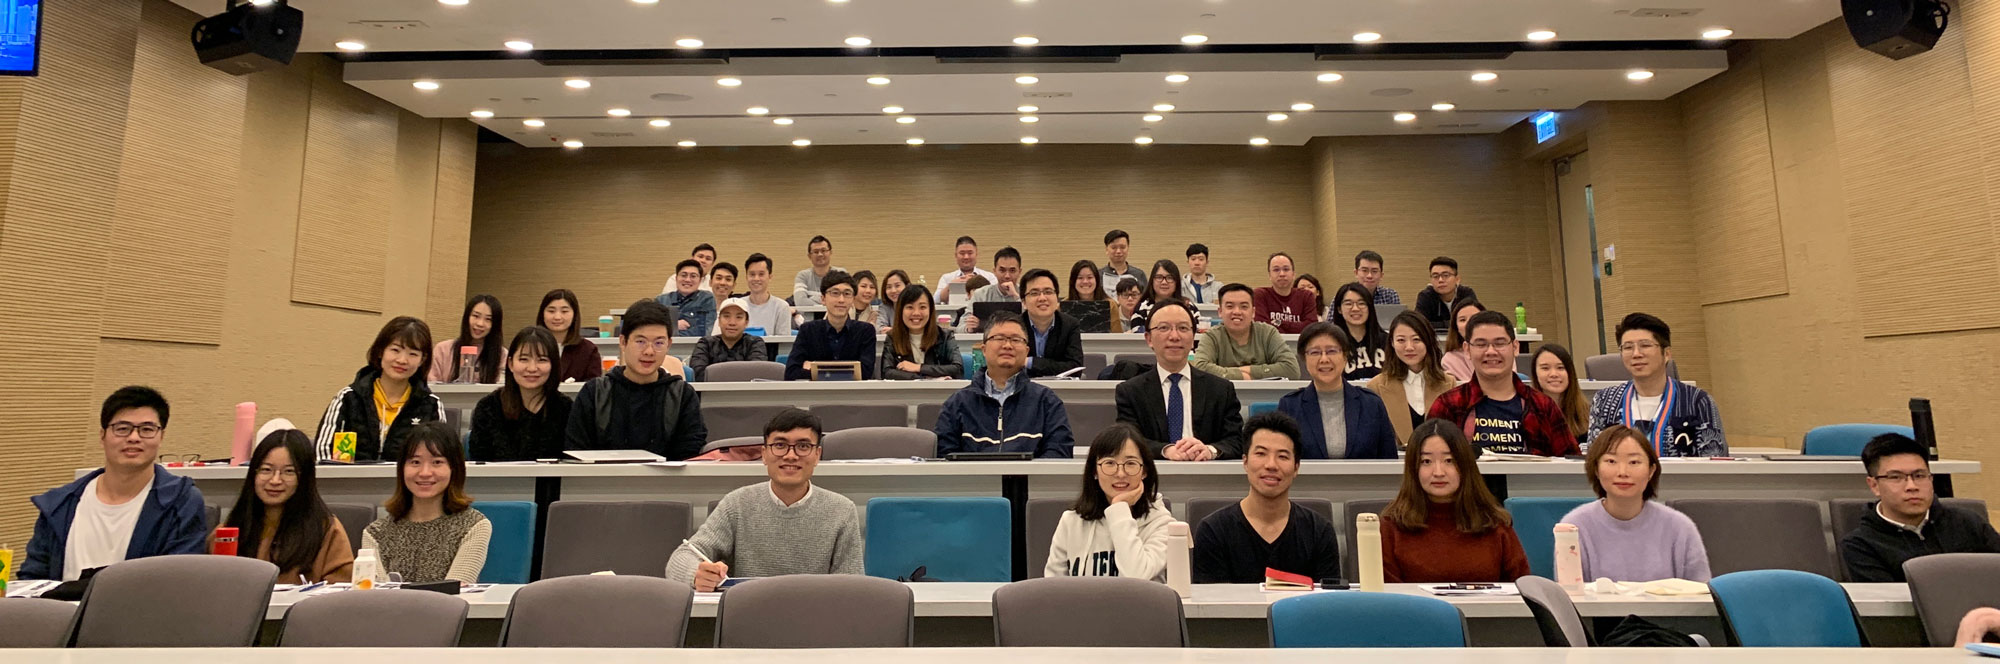 Mr. Victor Lam, Government Chief Information Officer at the "HKU's Guest Lecture on Understanding the Concept of Smart City" with Guests and Students.